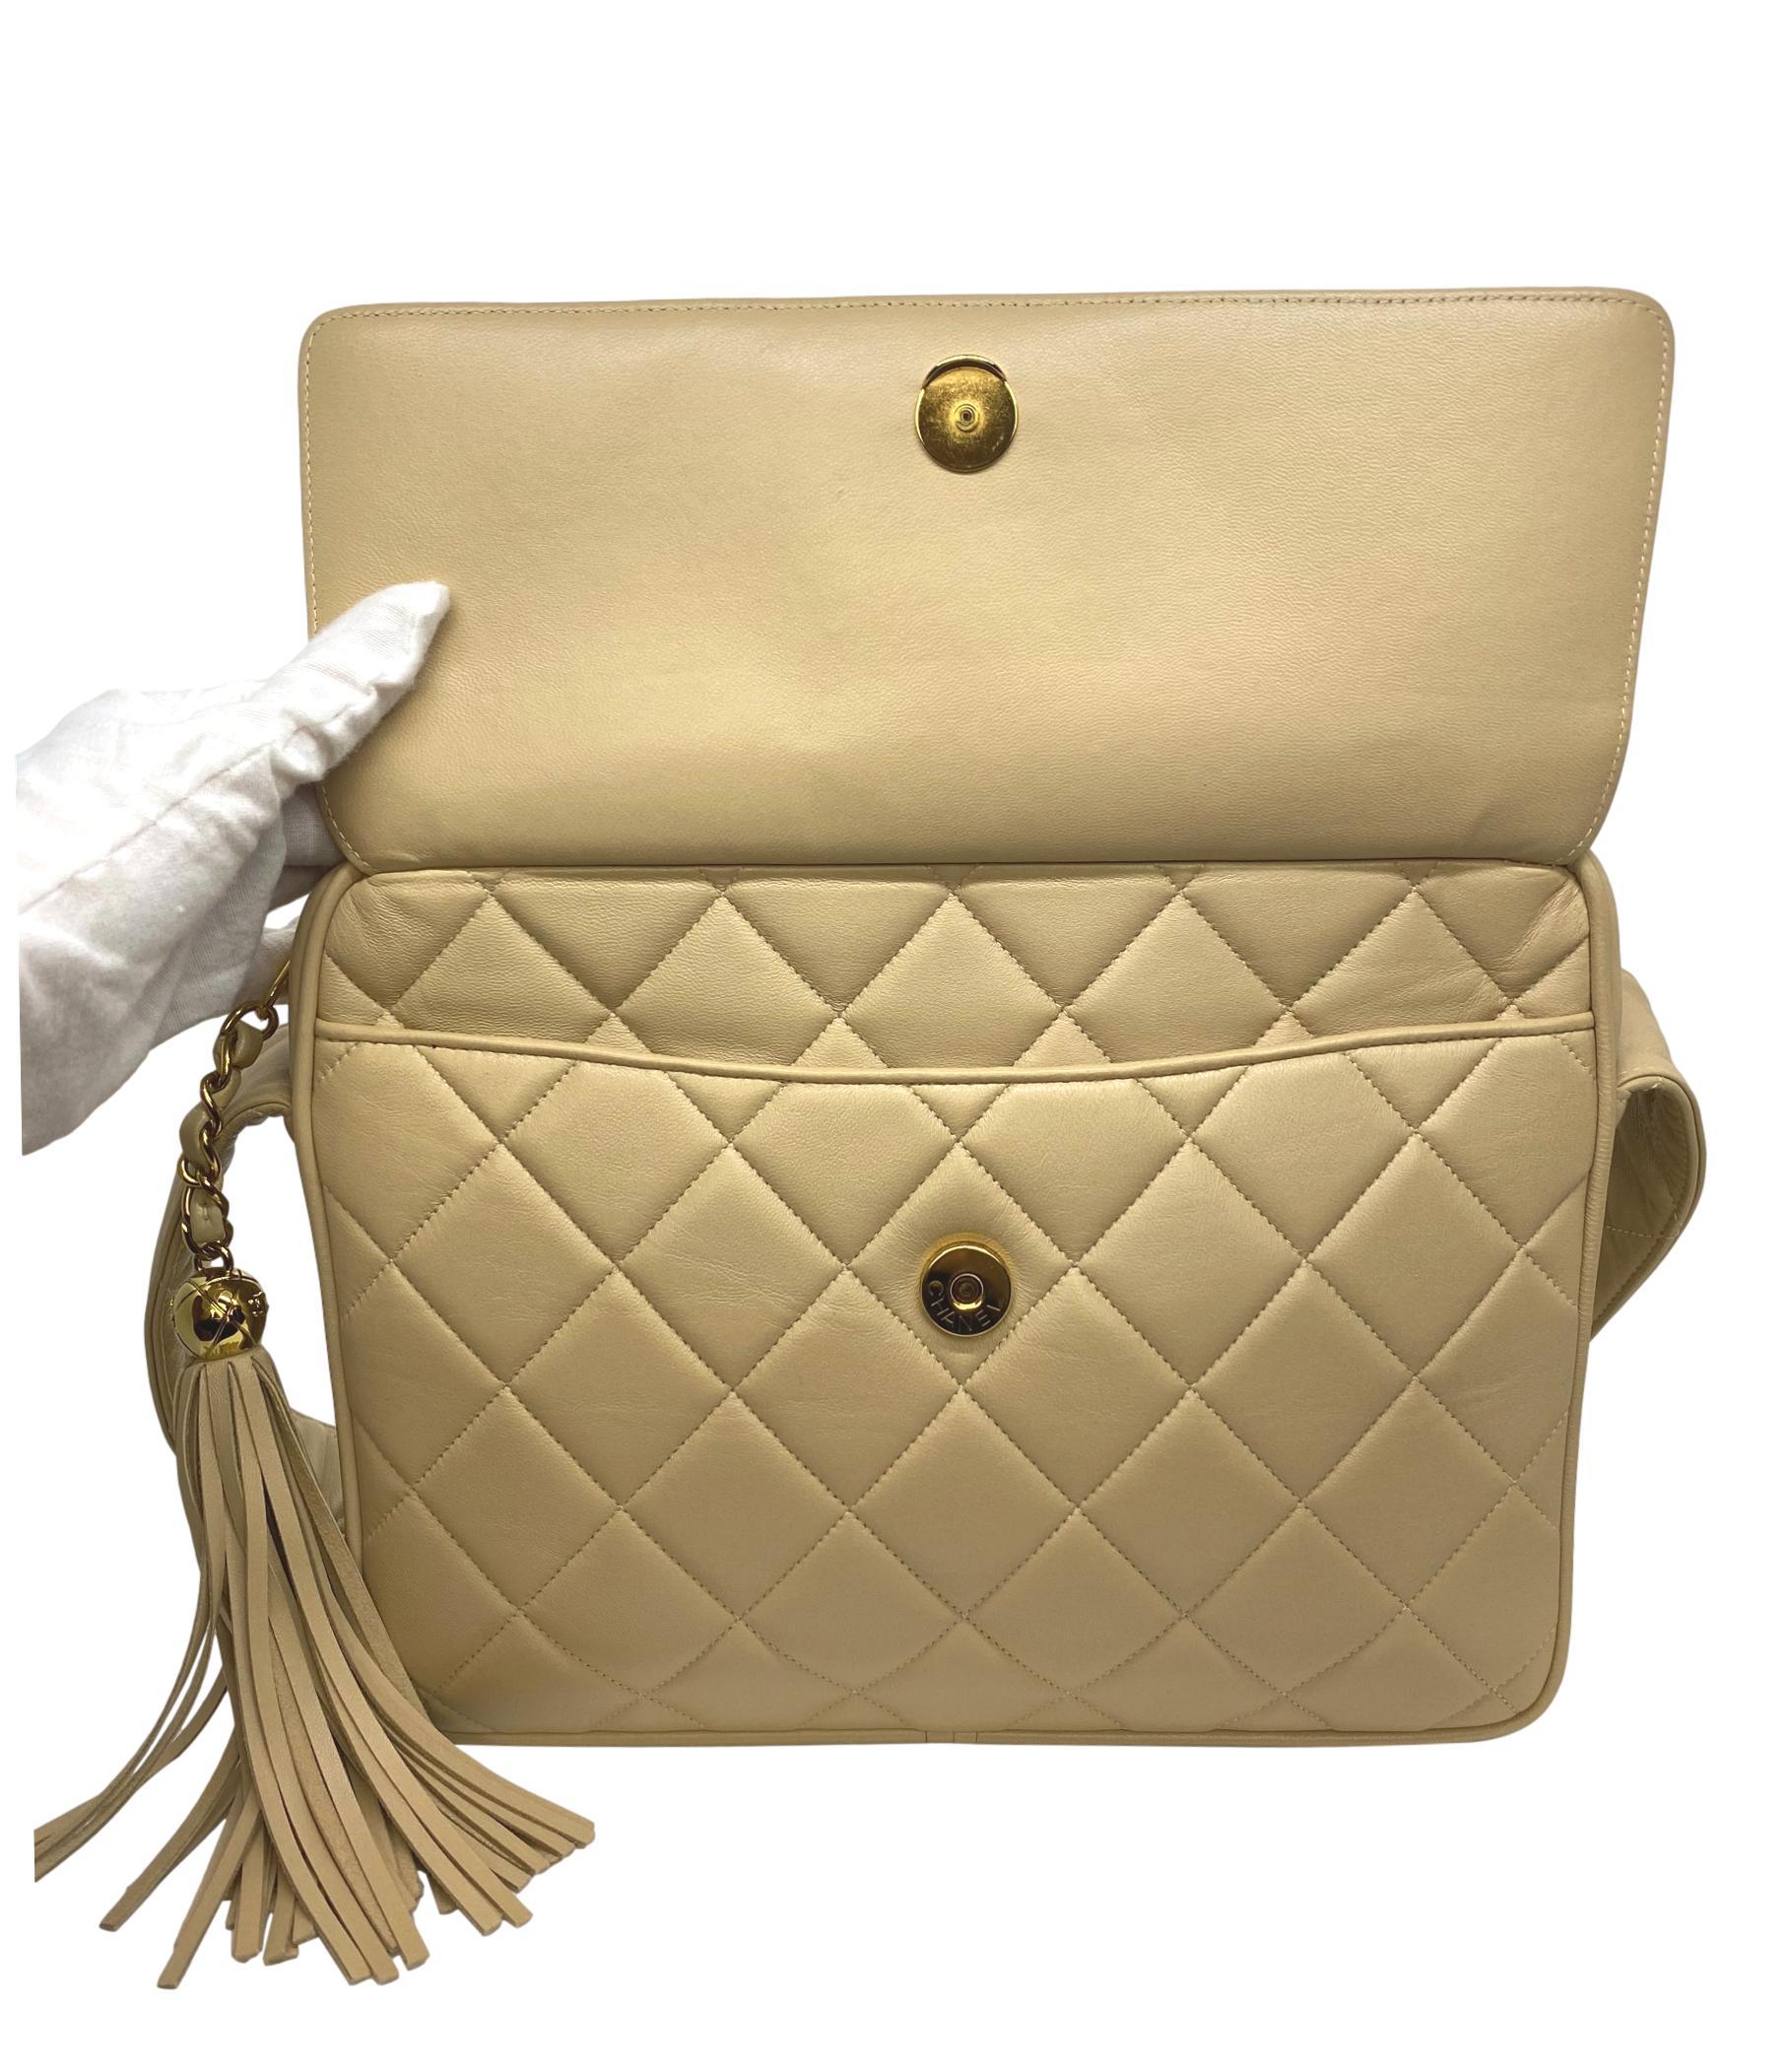 Women's or Men's  Chanel Vintage Beige Quilted Lambskin Leather Camera Bag with Gold Hardware